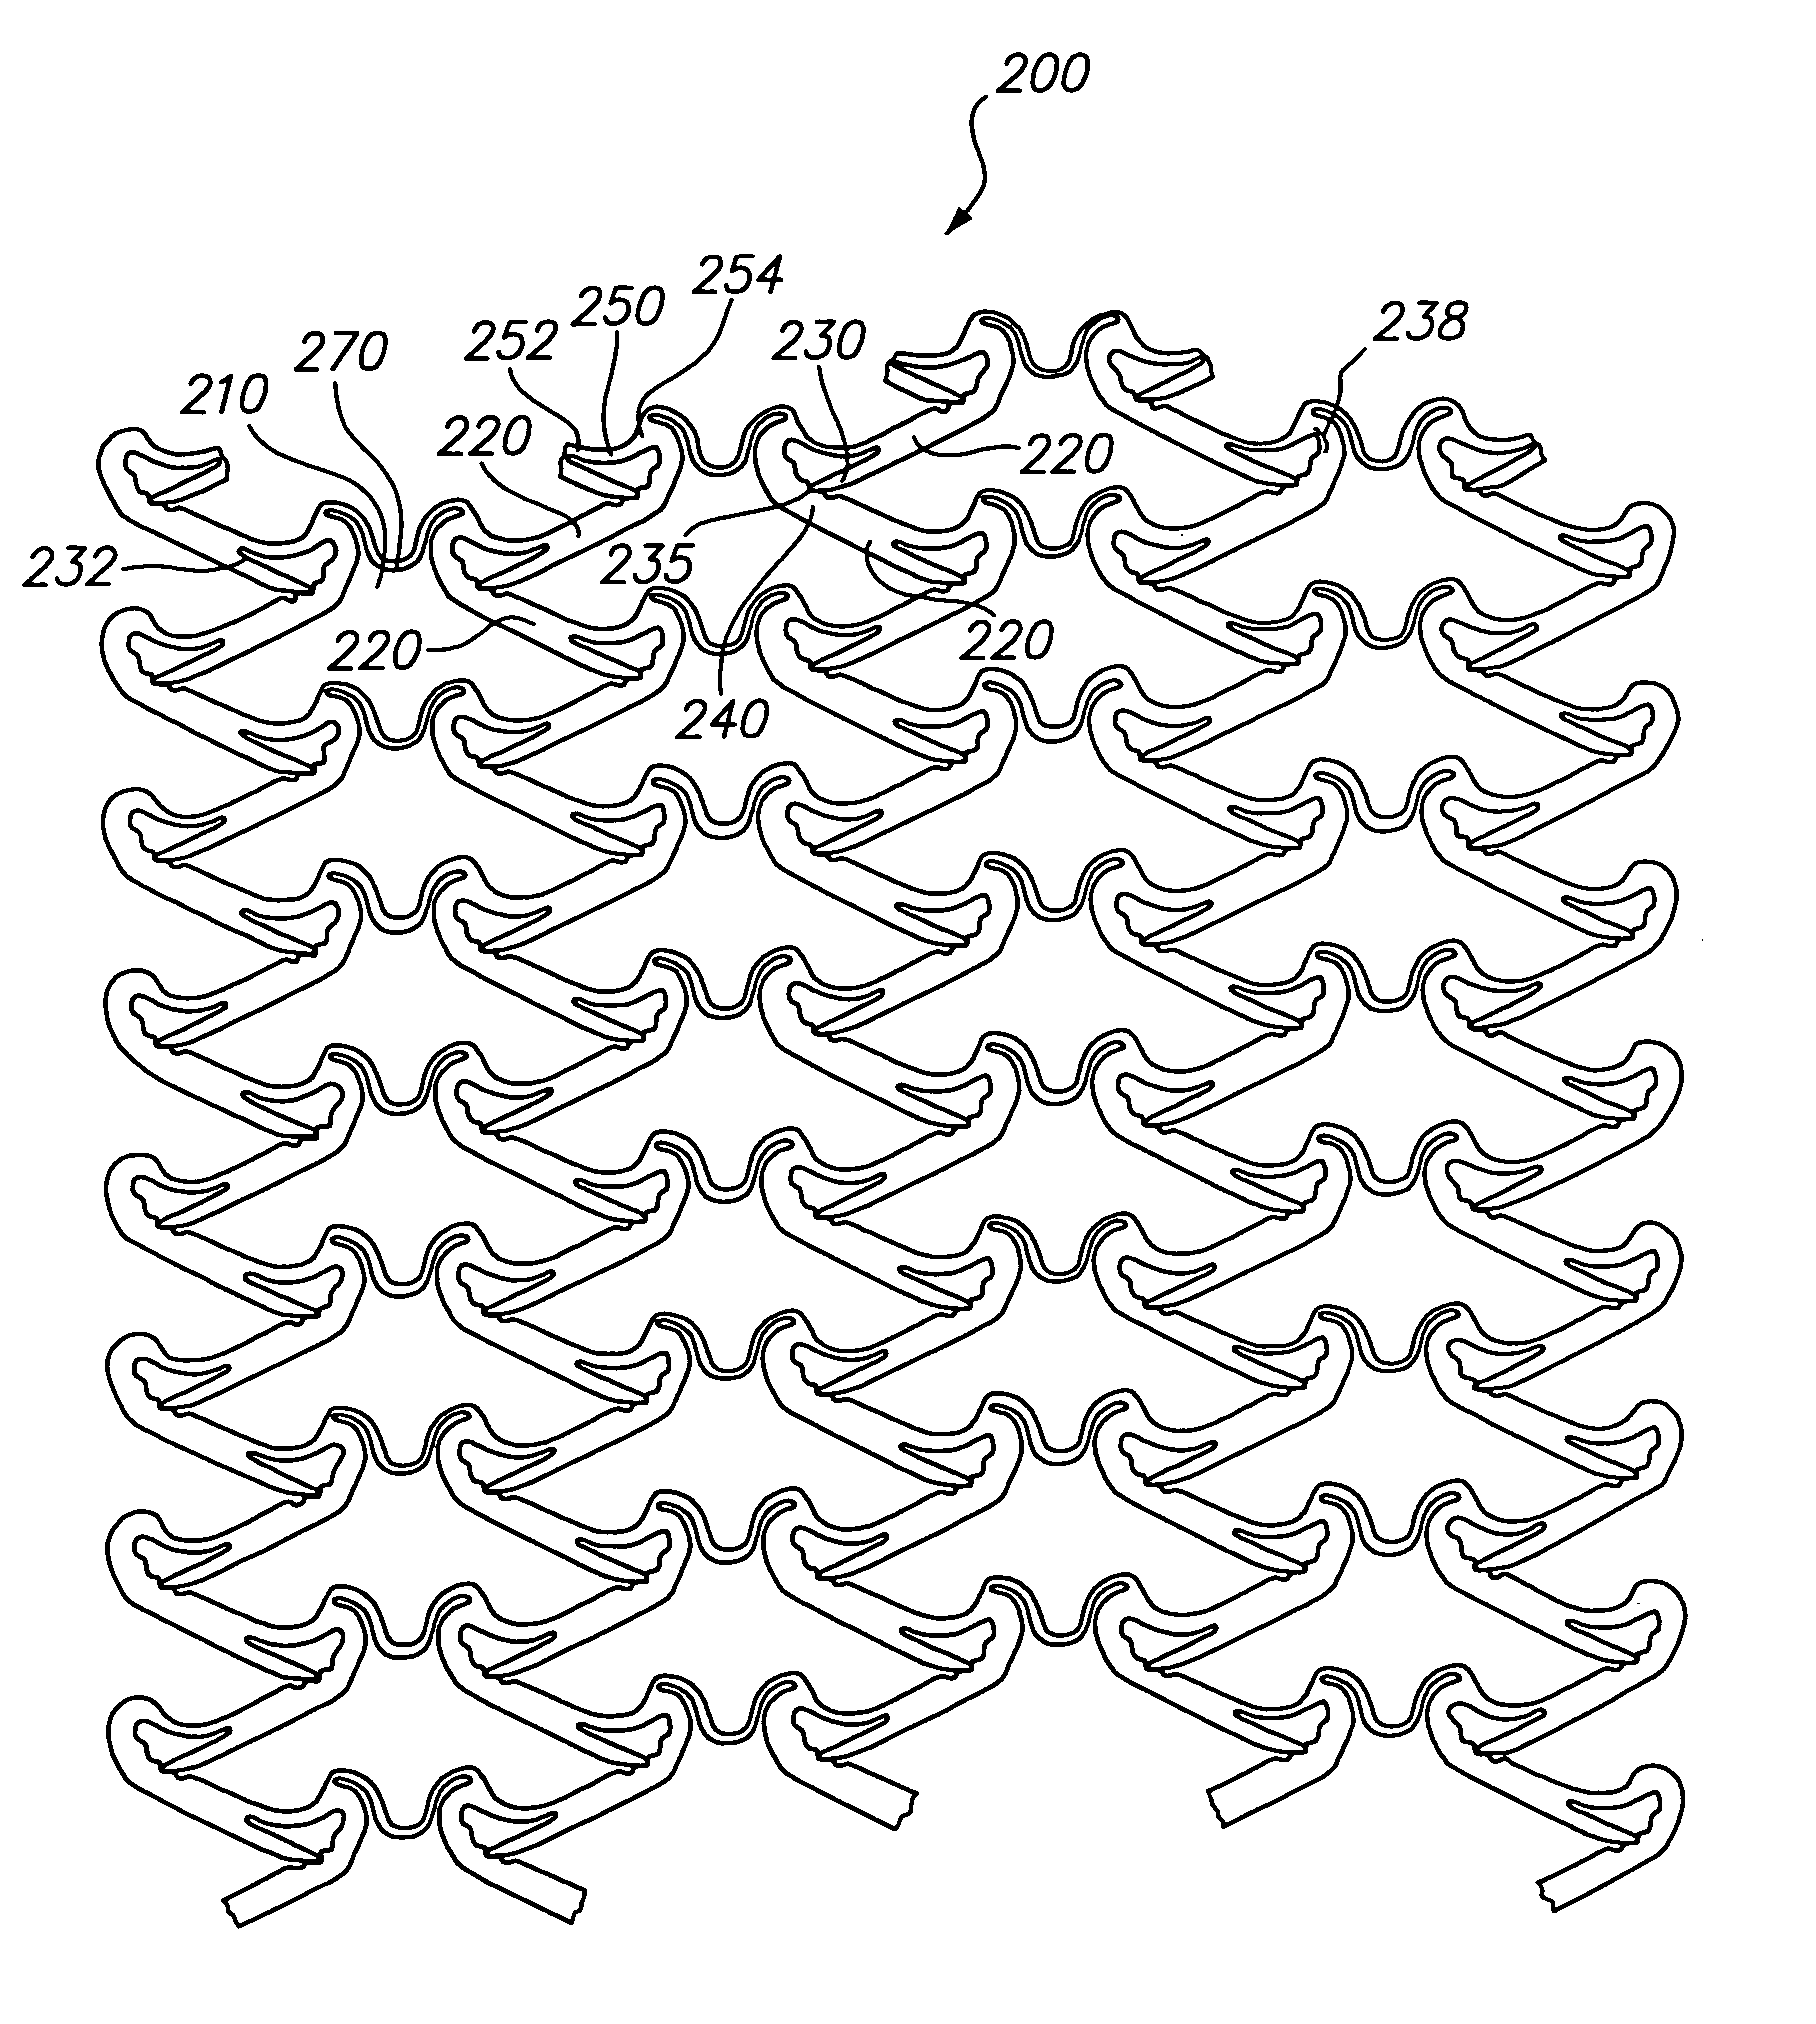 Expandable medical device with tapered hinge